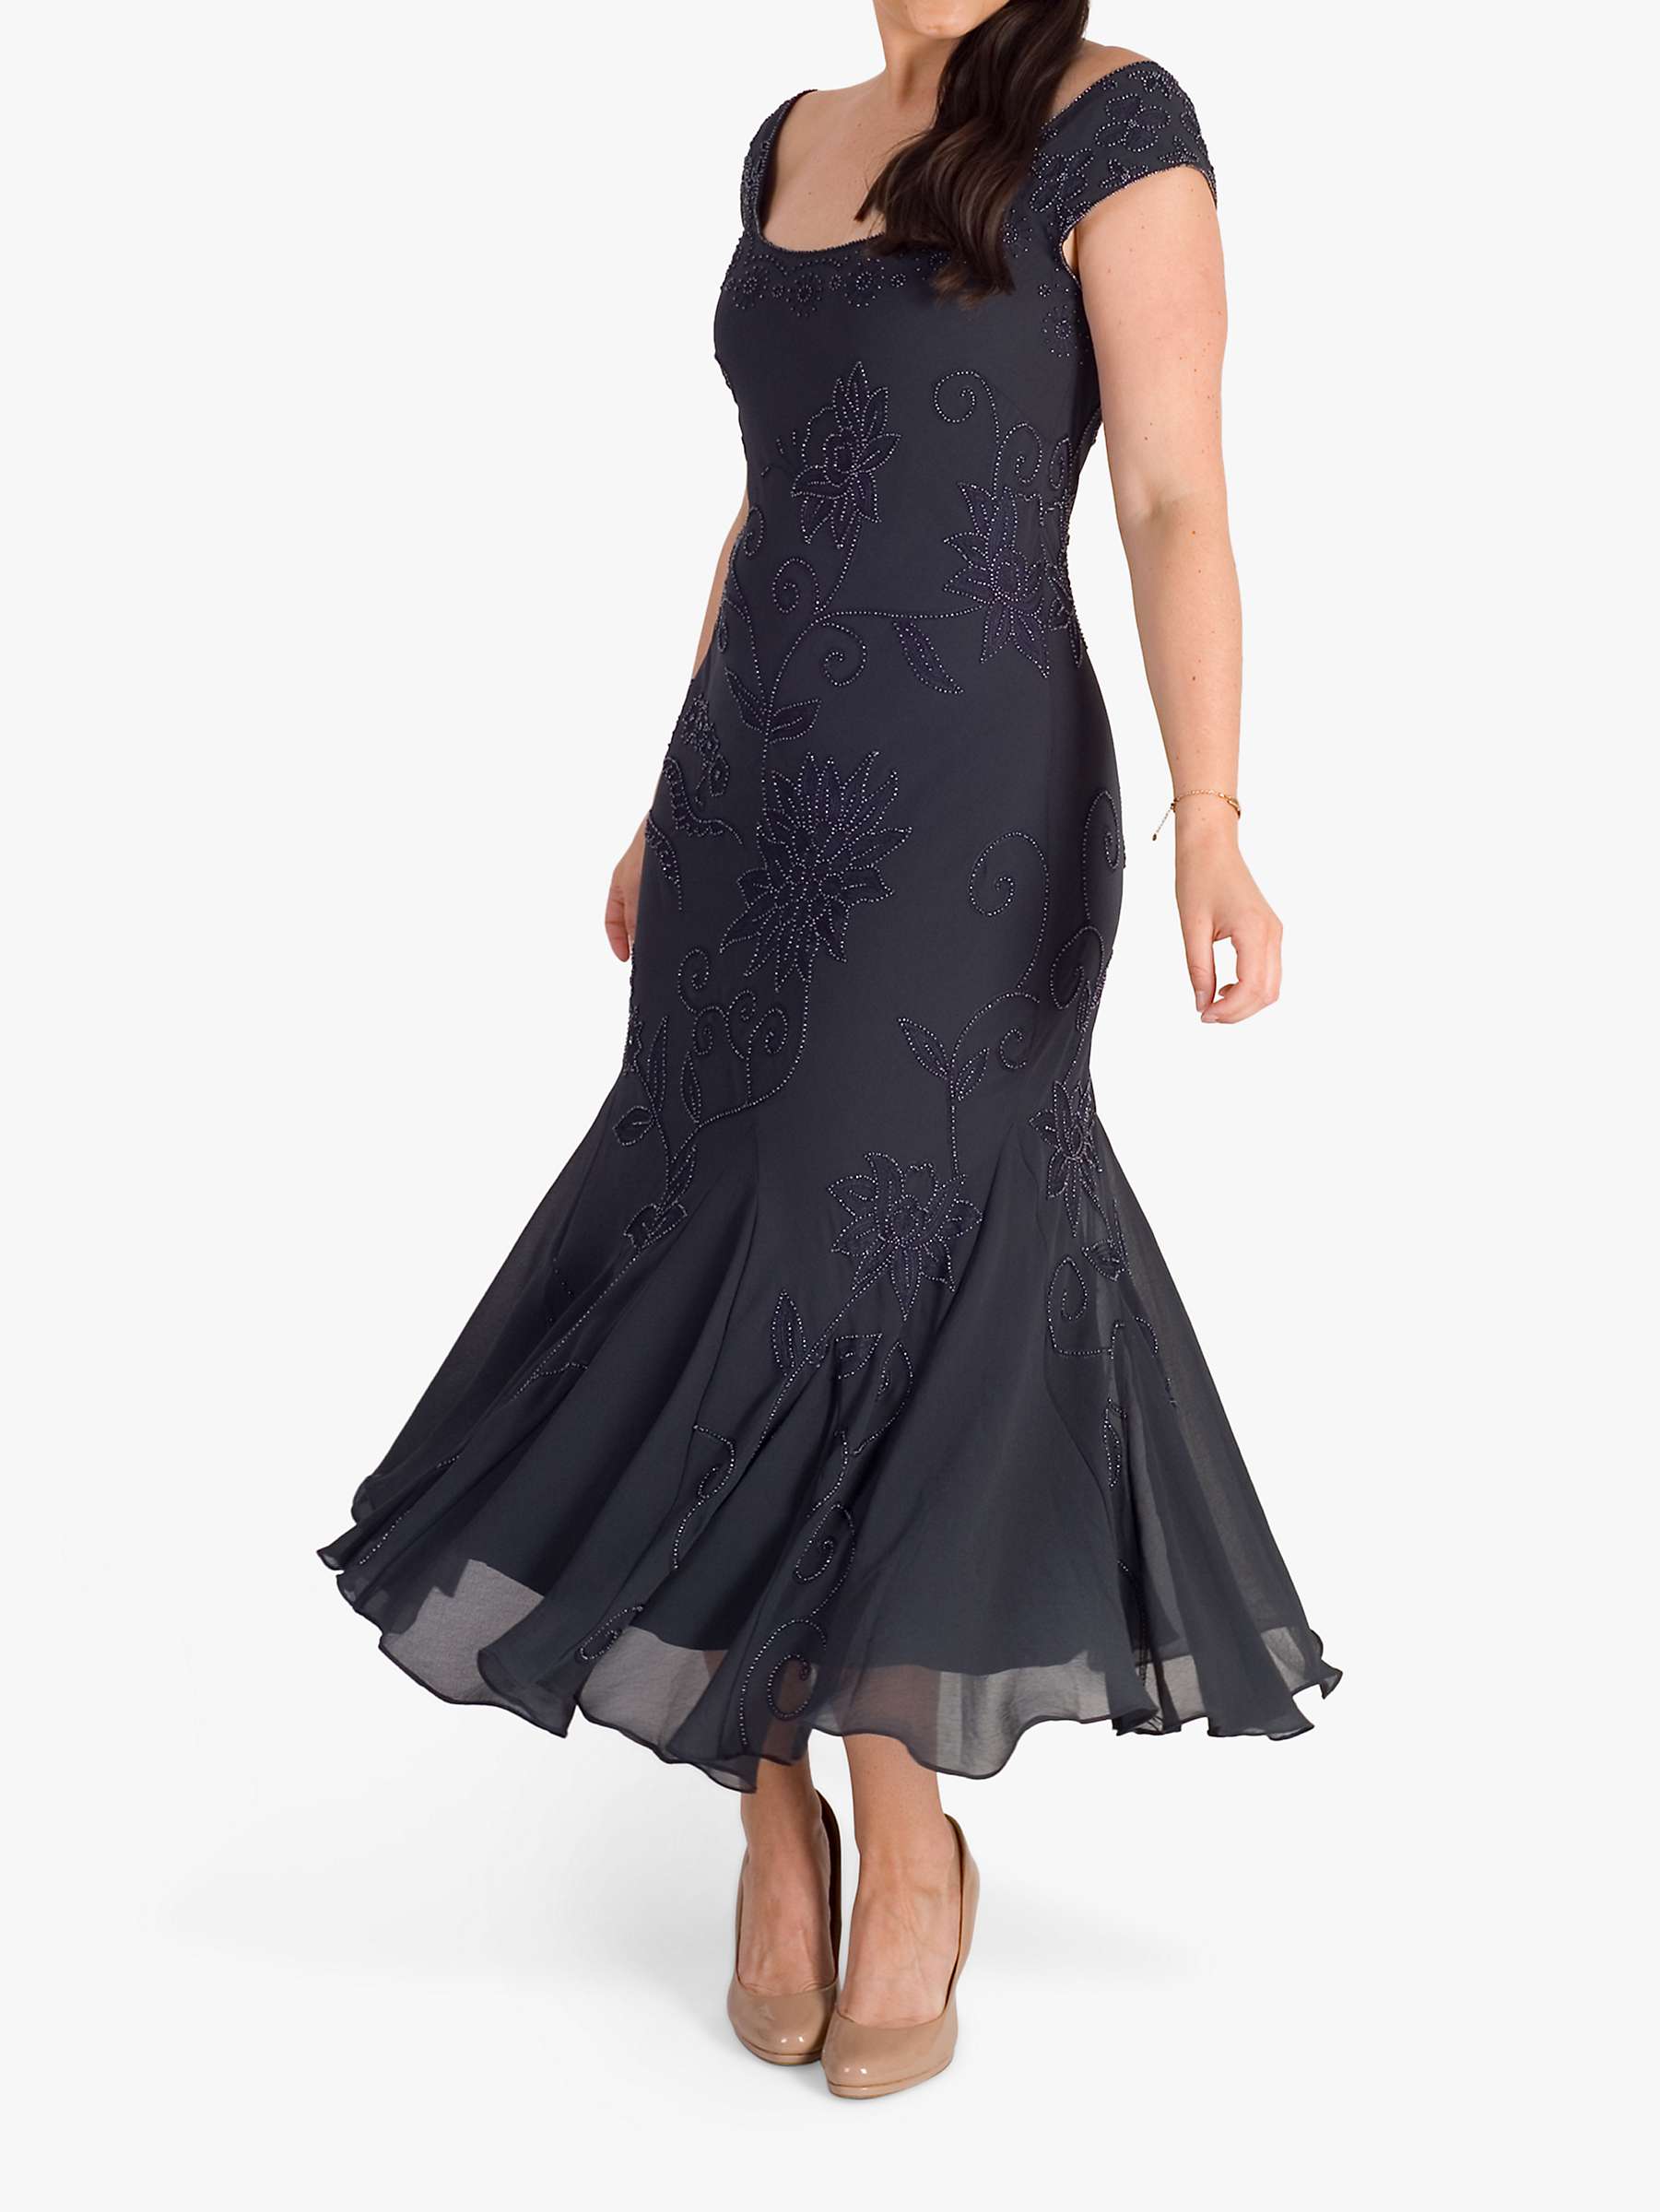 Buy chesca Beaded and Embroidered Dress, Pewter Online at johnlewis.com